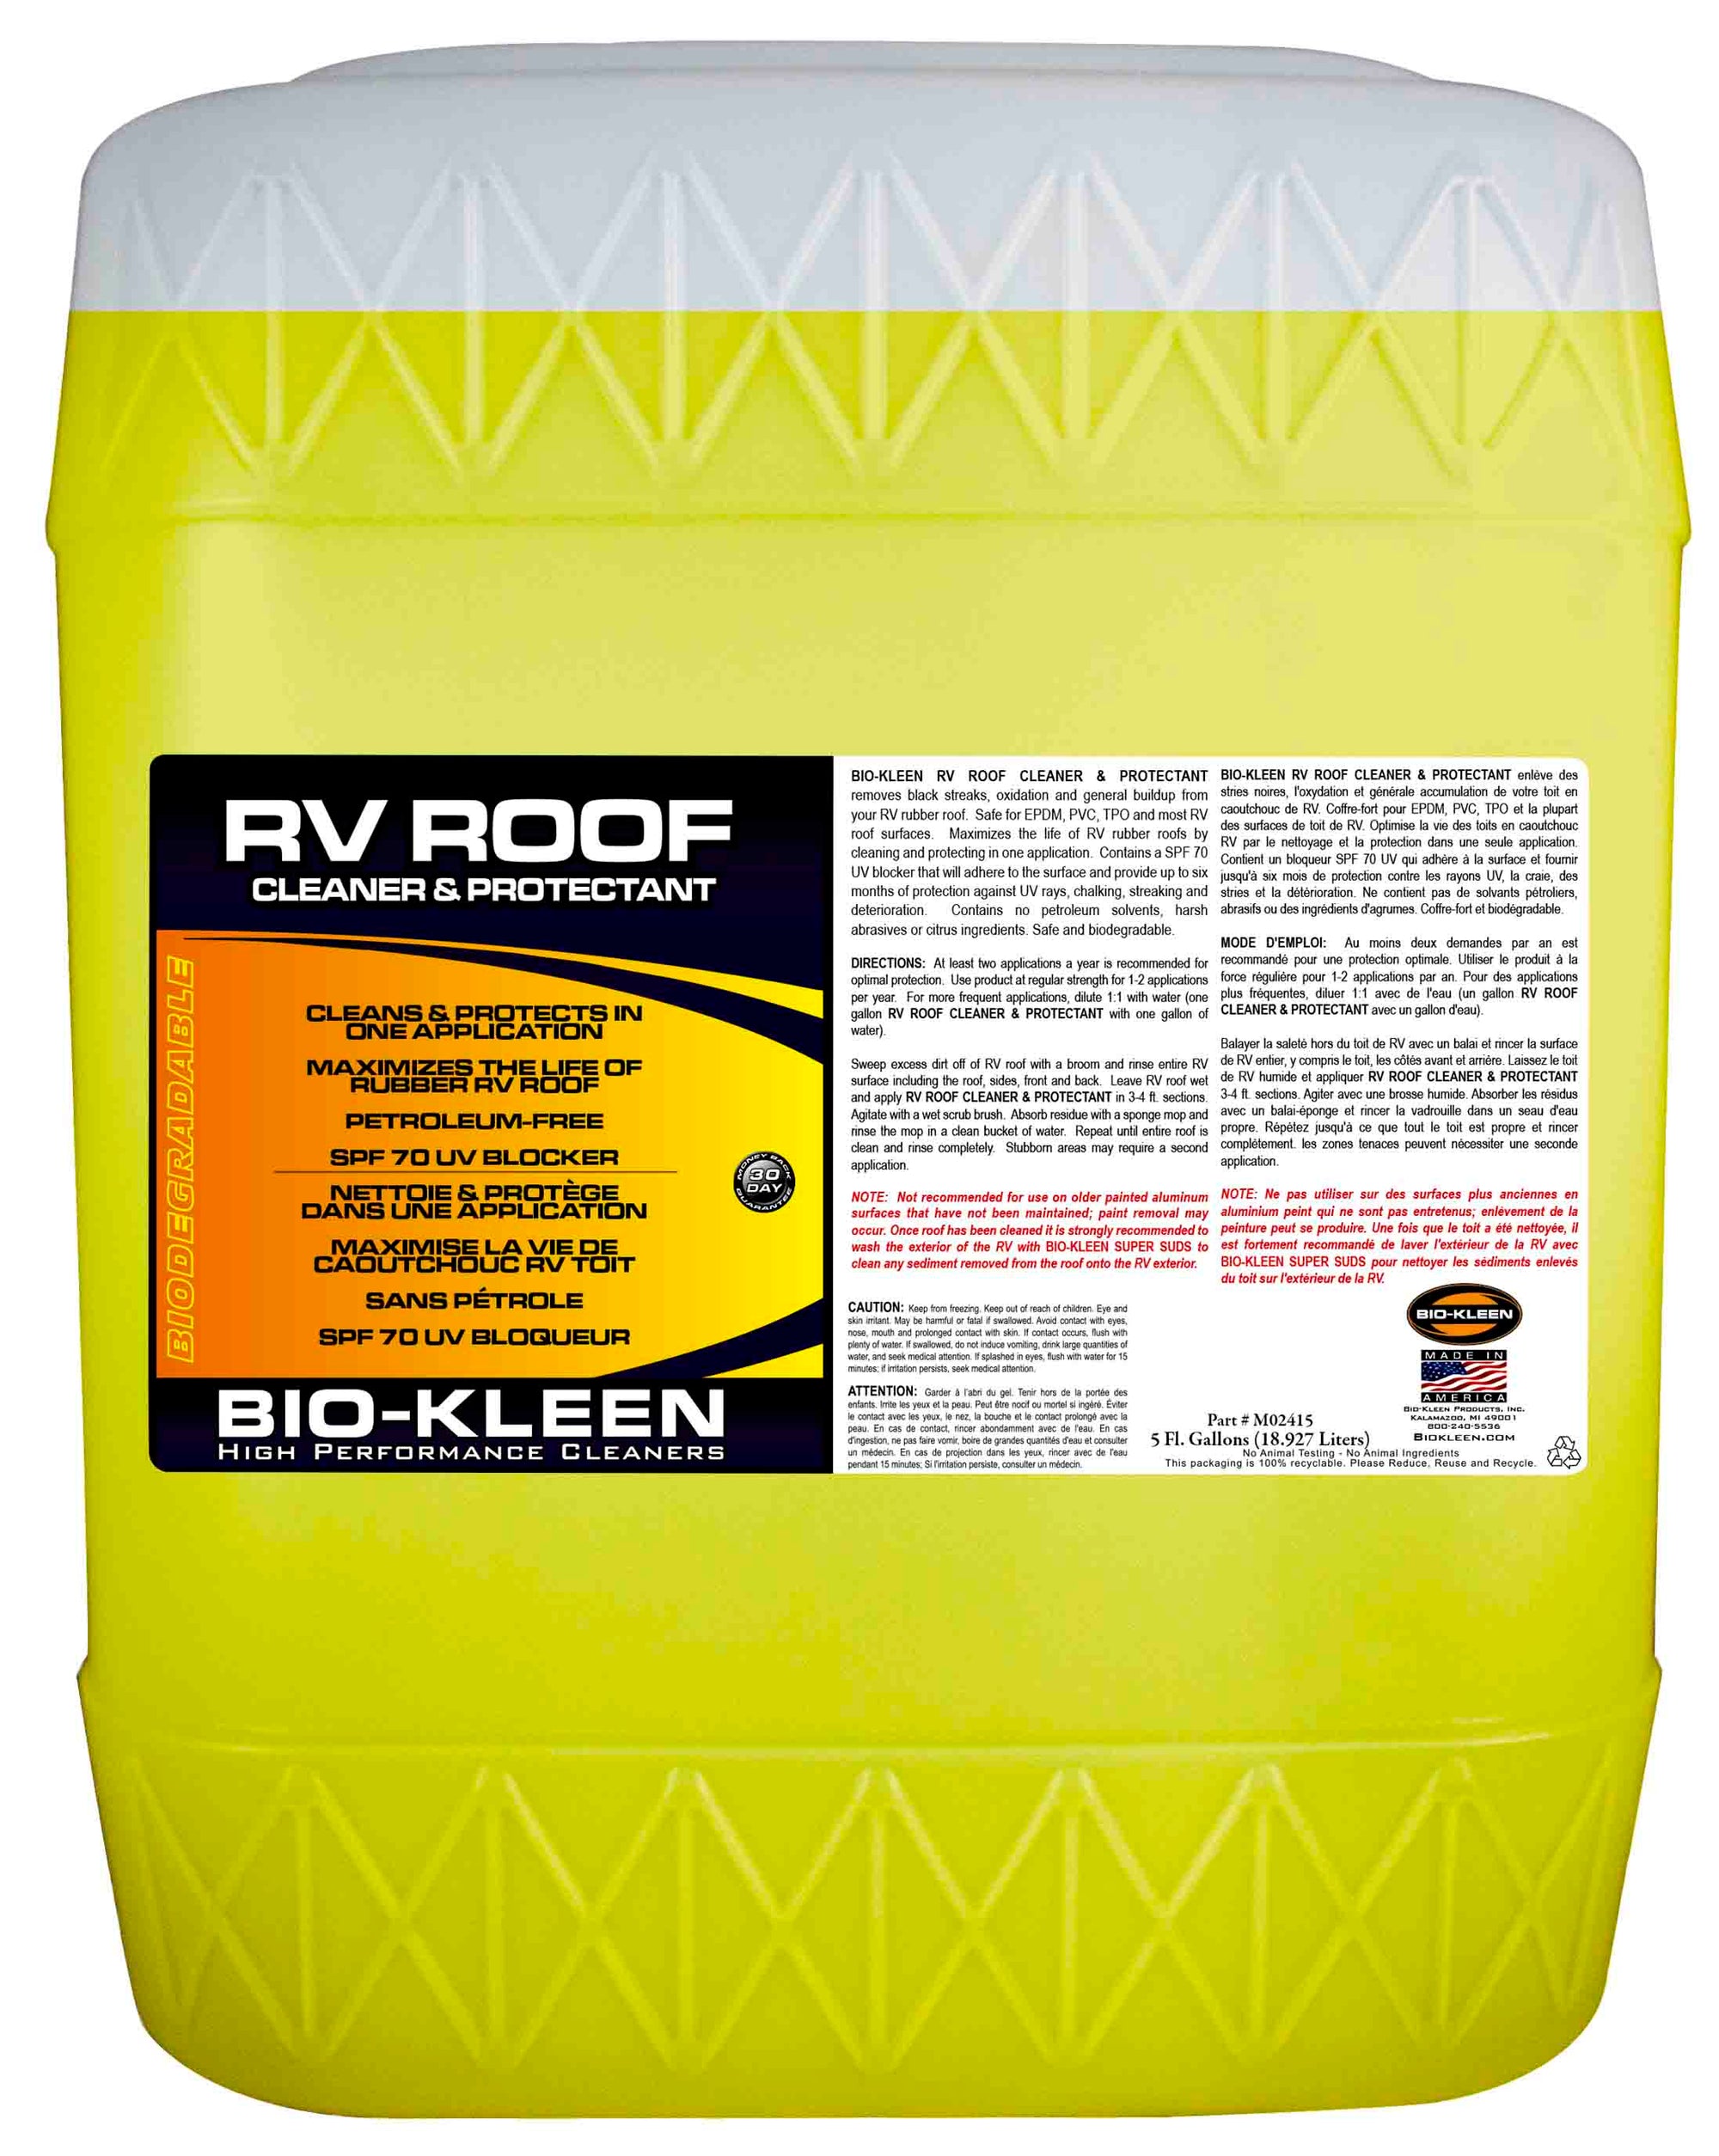 Bio-Kleen M02407 RV Roof Cleaner & Protectant - 32 oz.